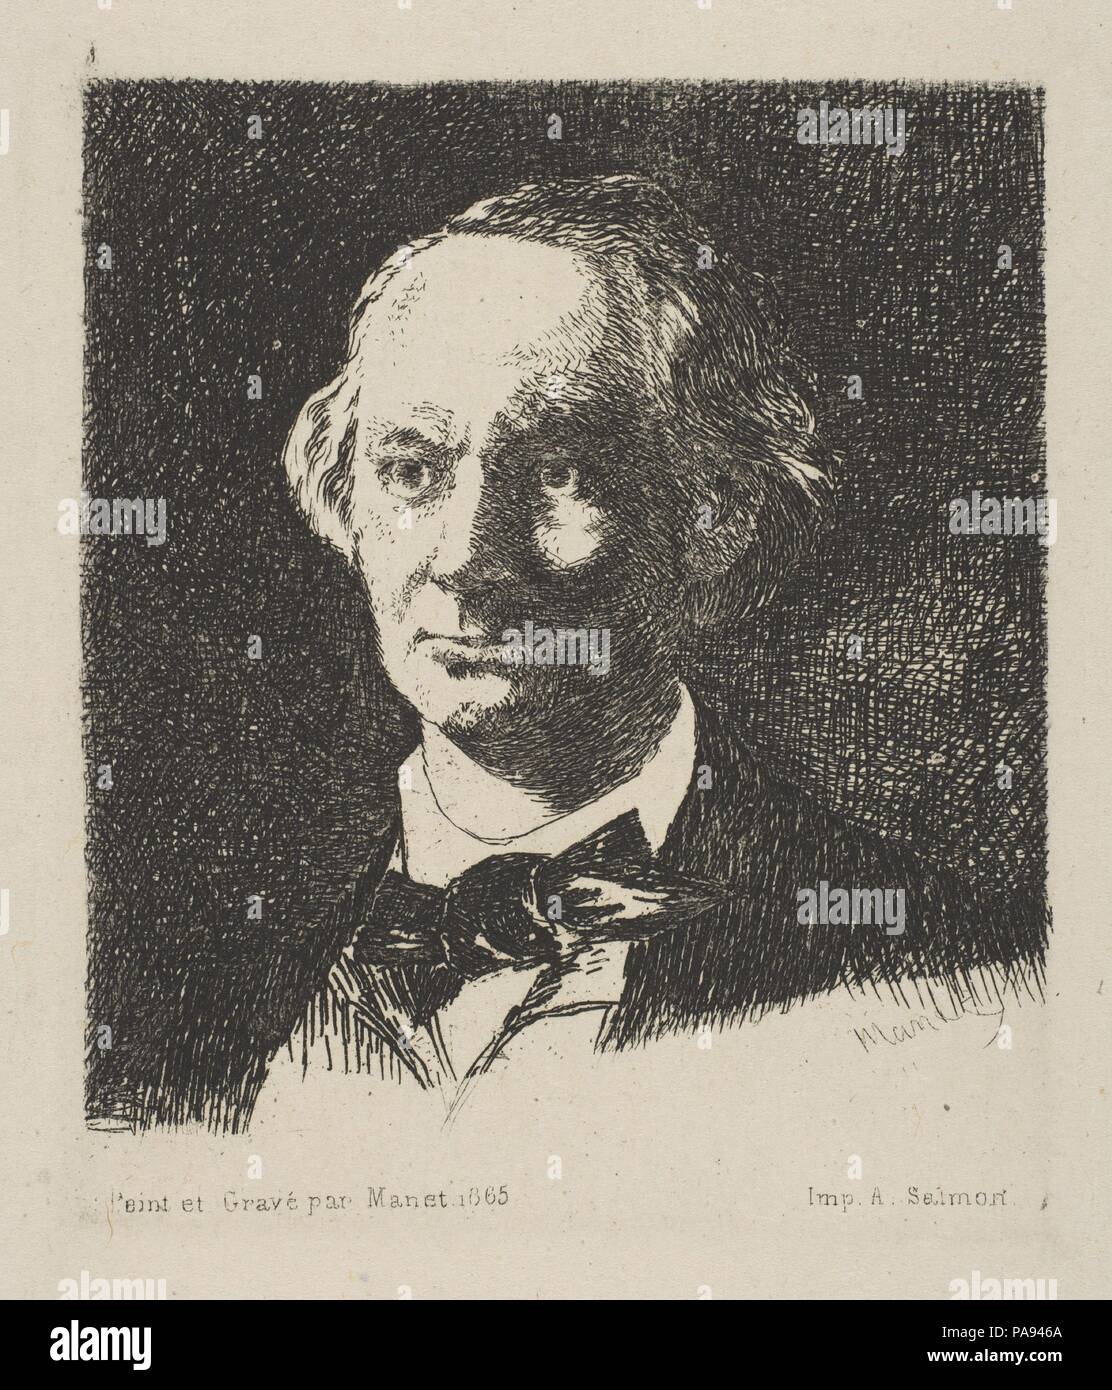 Portrait of Charles Baudelaire, Full Face, after a photograph by Nadar. Artist: Édouard Manet (French, Paris 1832-1883 Paris); After Nadar (French, Paris 1820-1910 Paris). Dimensions: plate: 3 11/16 x 3 1/4 in. (9.4 x 8.2 cm)  sheet: 10 3/16 x 8 7/16 in. (25.9 x 21.5 cm). Sitter: Charles Baudelaire (French, Paris 1821-1867 Paris). Date: 1868. Museum: Metropolitan Museum of Art, New York, USA. Stock Photo